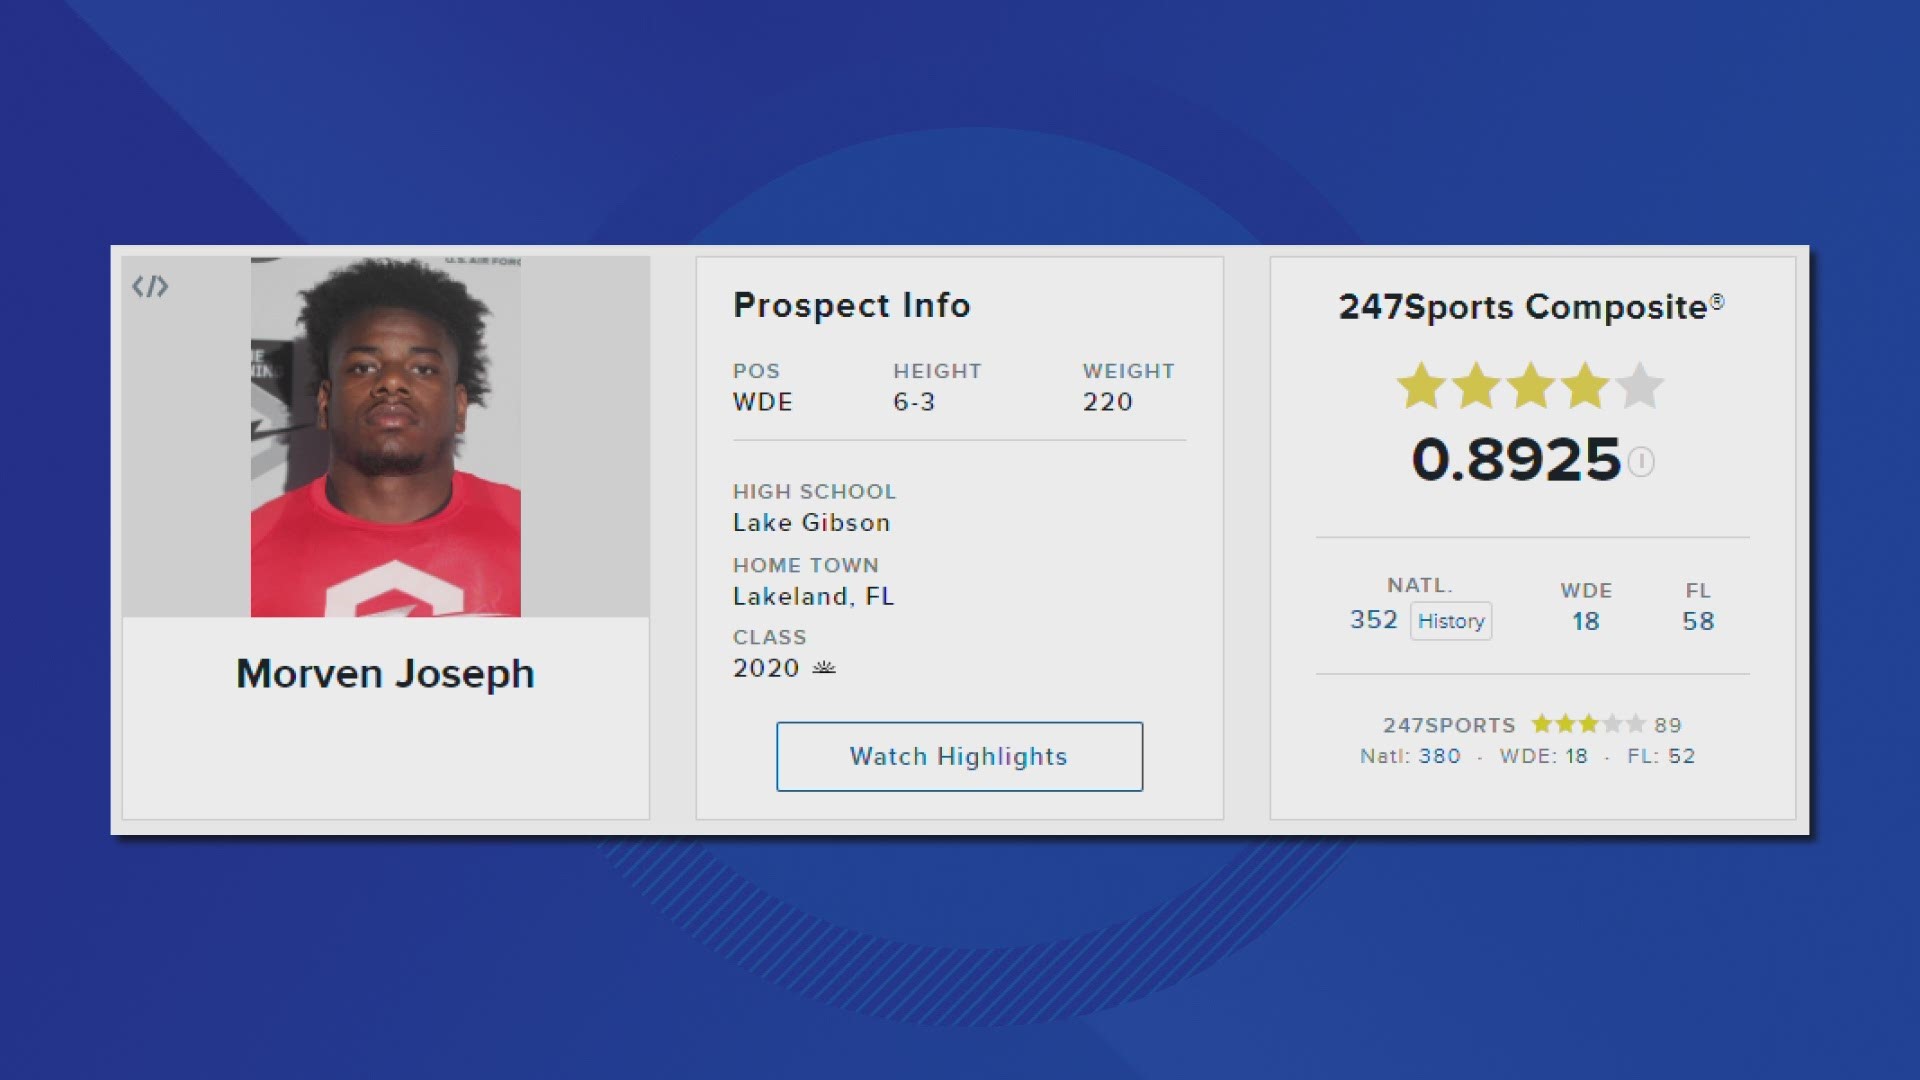 The four-star pass rusher could provide a spark for the Vols. He chose Tennessee over Florida and Florida State.